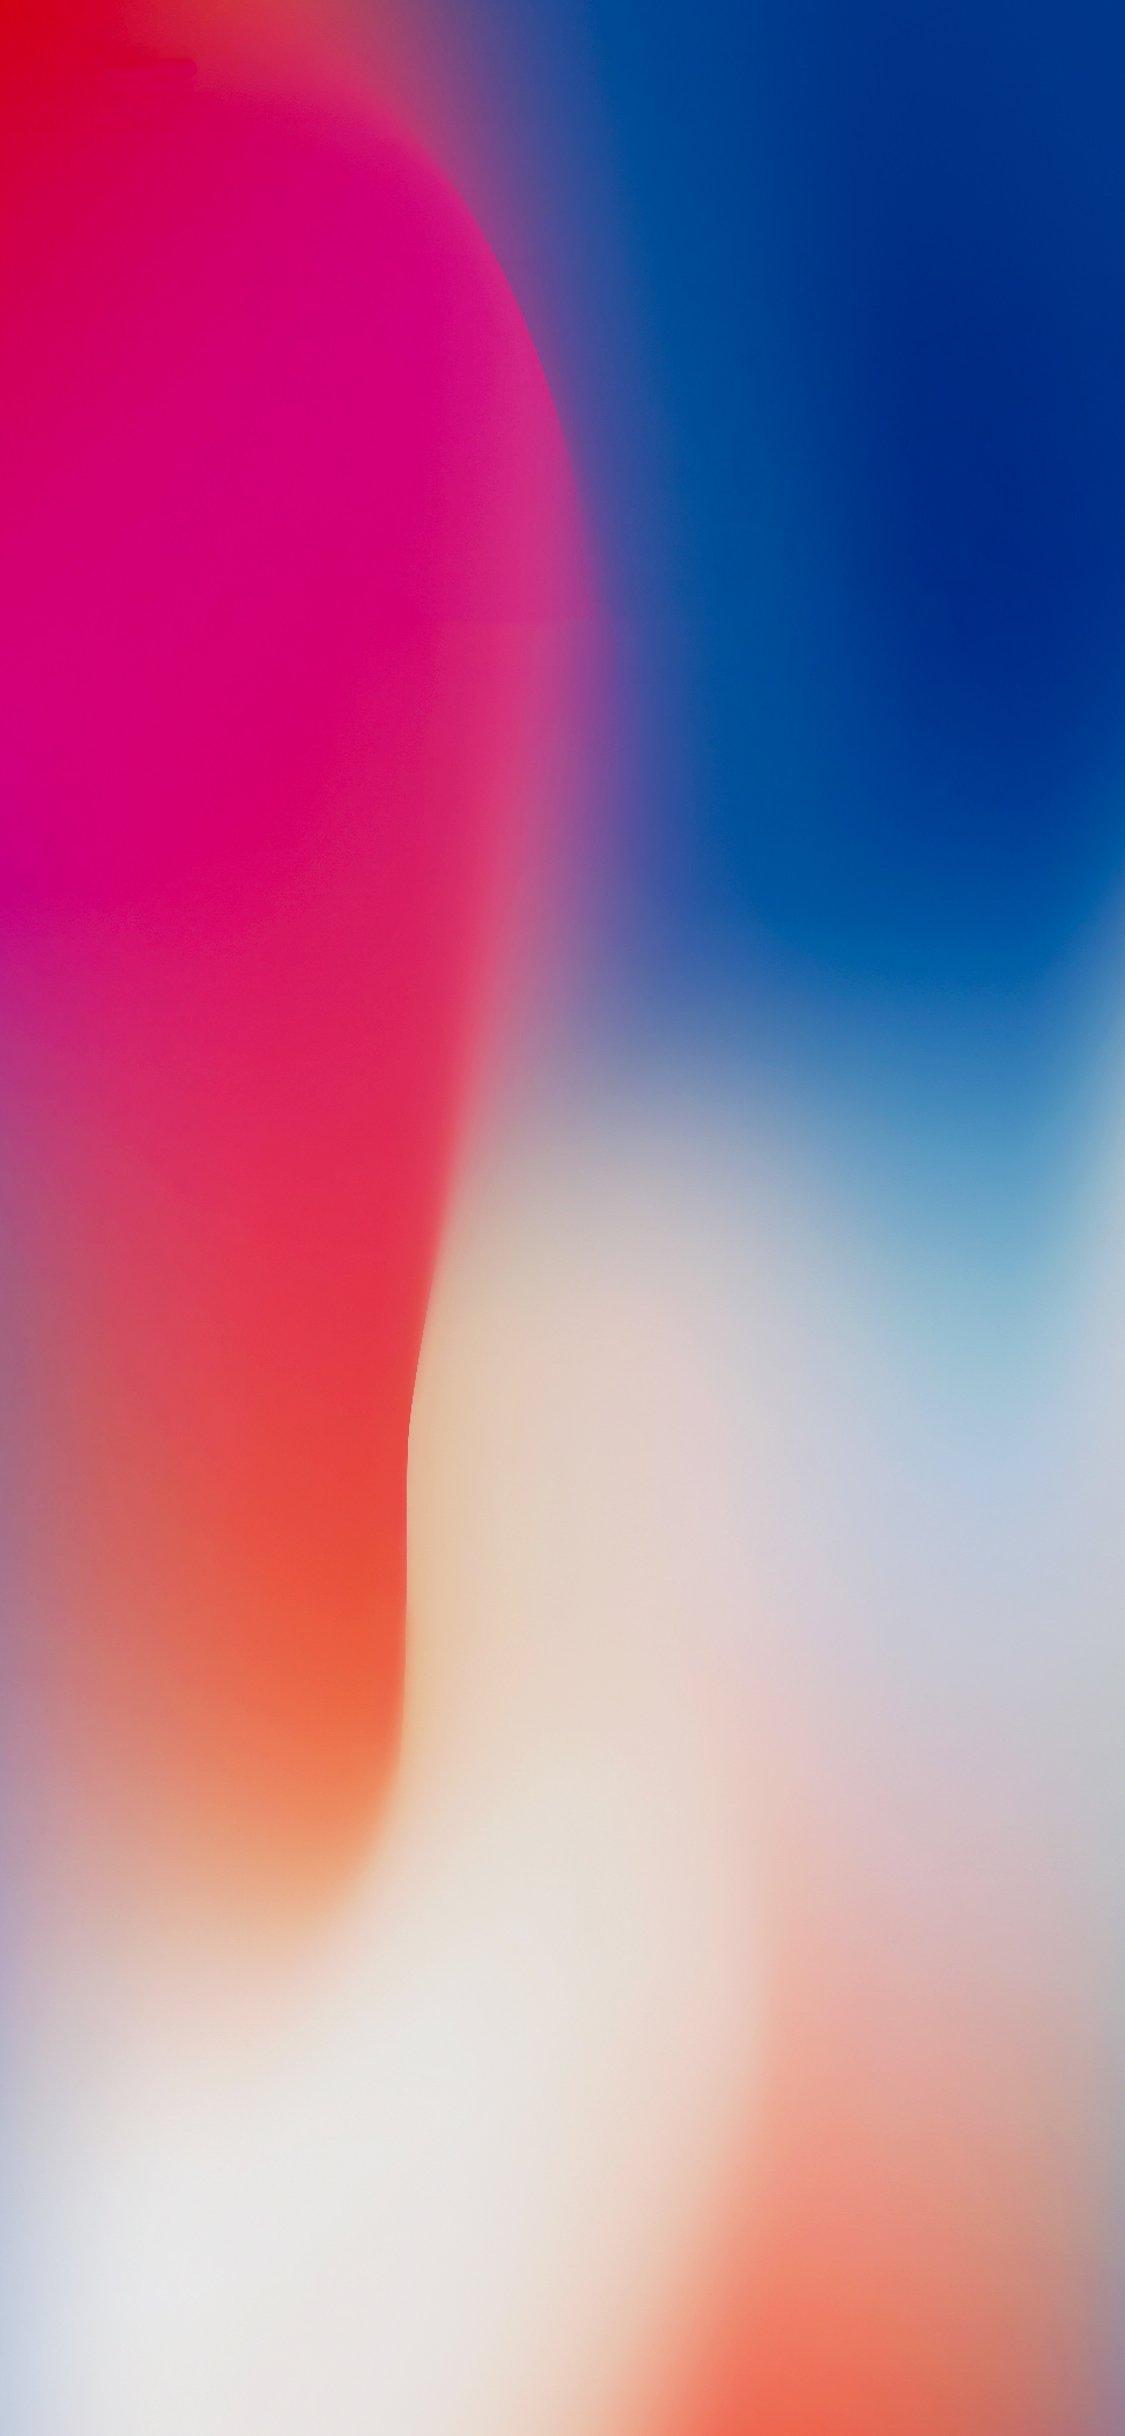 Download New iPhone 8 & iPhone 8 Plus Aura Wallpapers for Any Device